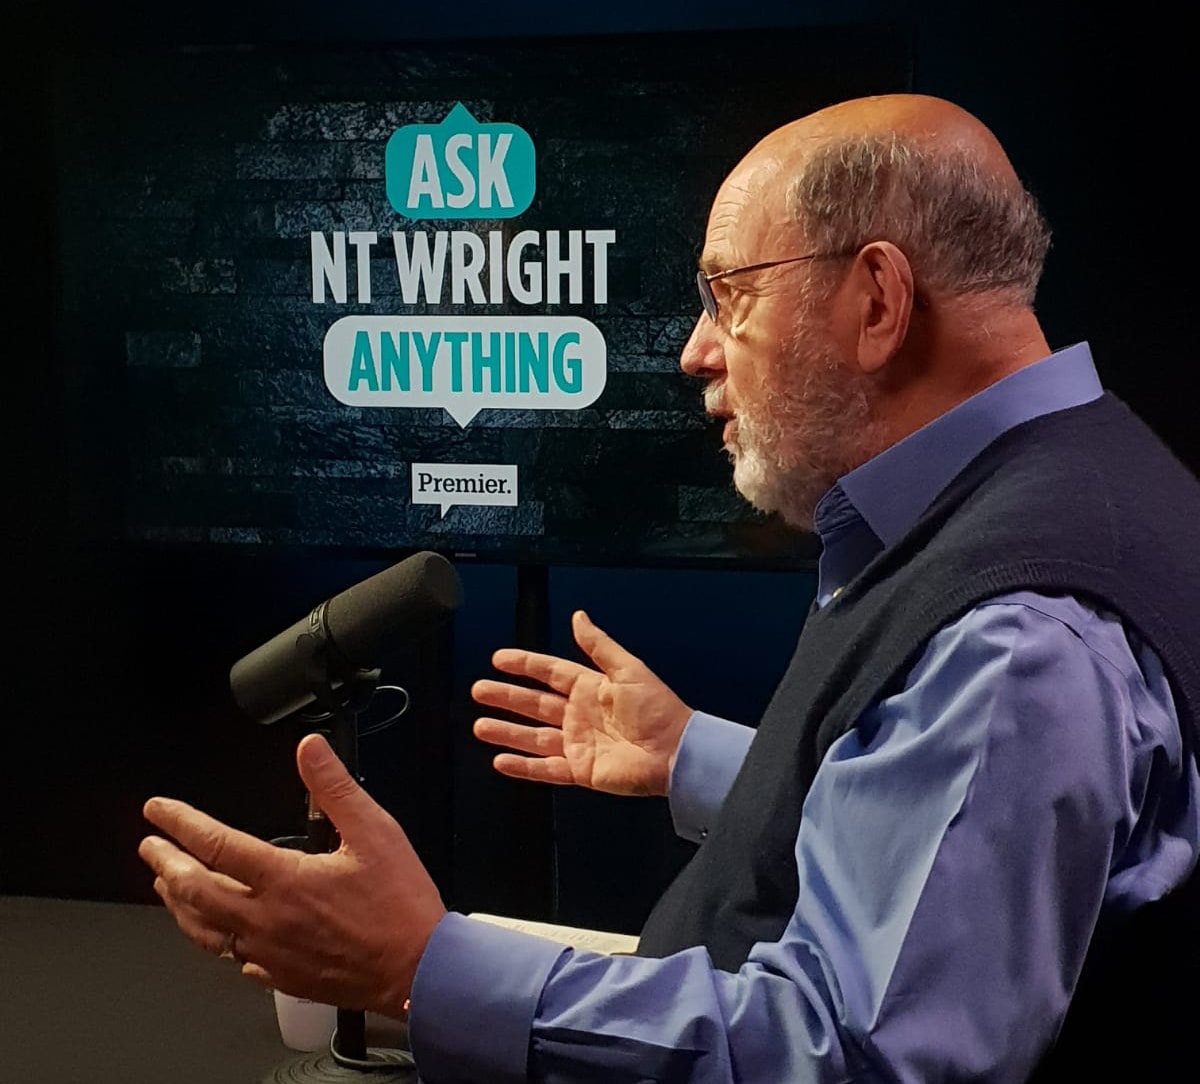 Ask NT Wright Anything » Premier Insight